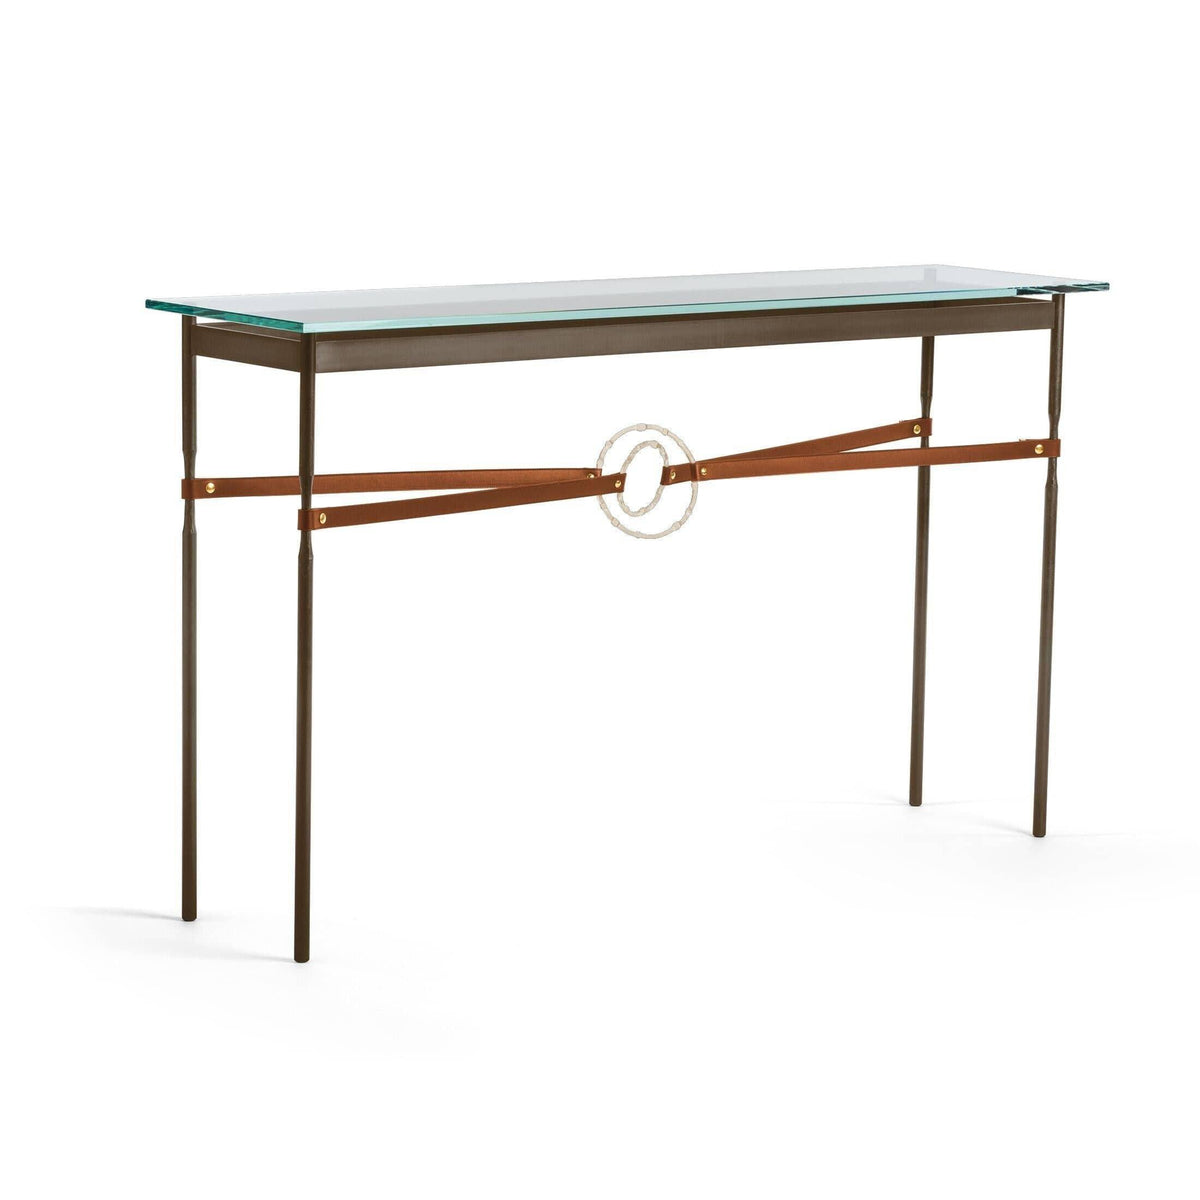 Hubbardton Forge - Equus Chestnut Leather Console Table - 750118-05-84-LC-VA0714 | Montreal Lighting & Hardware